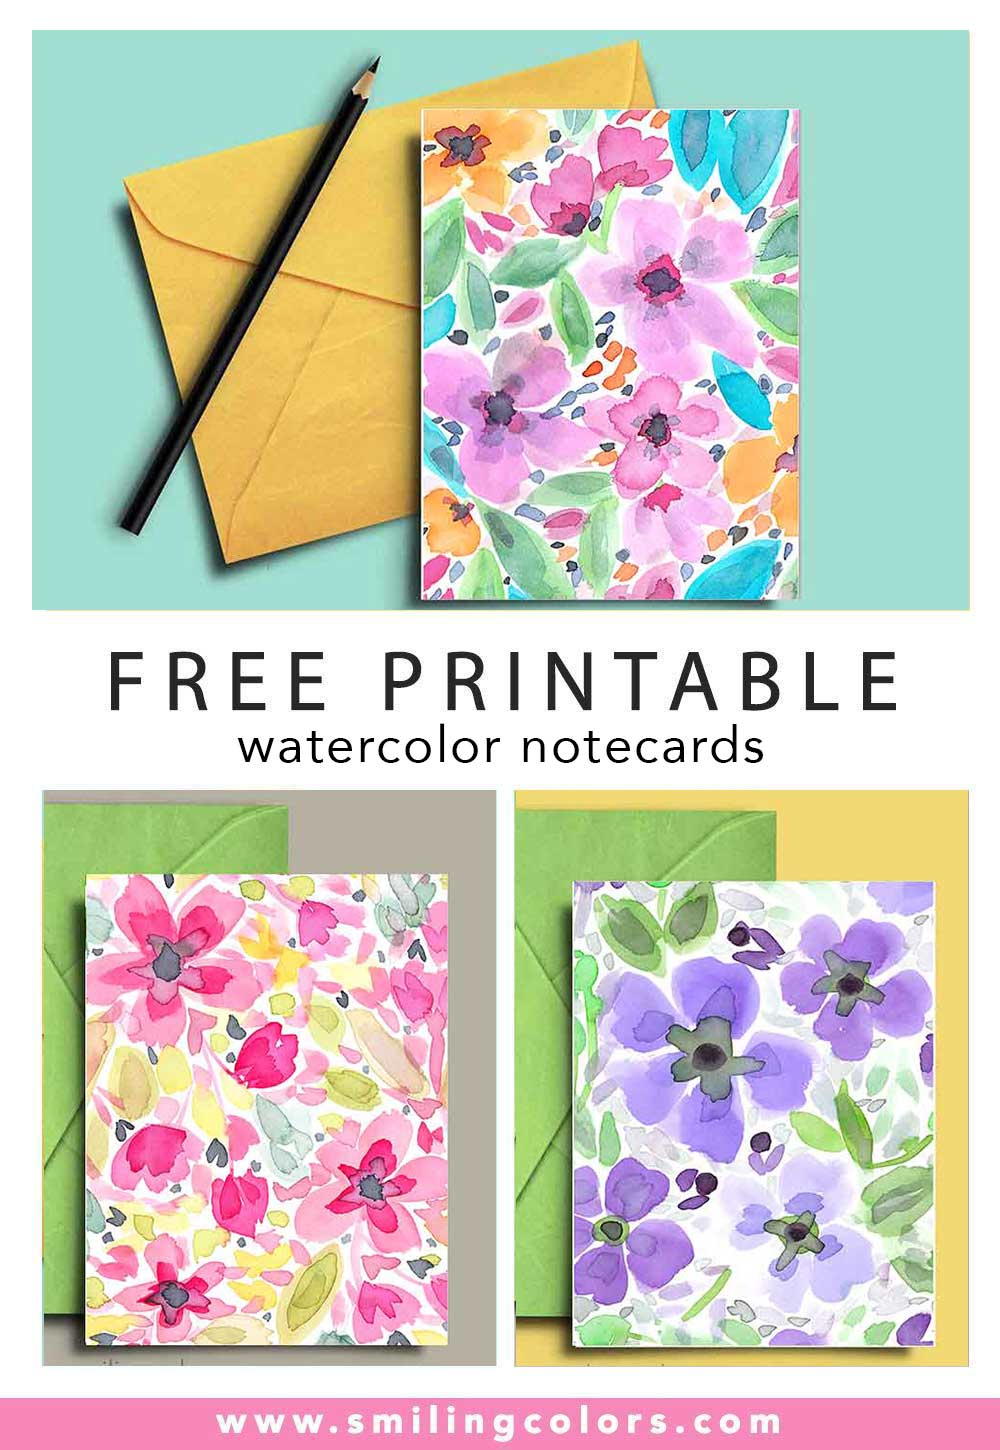 Free Printable Note Cards by FaveCrafts.com